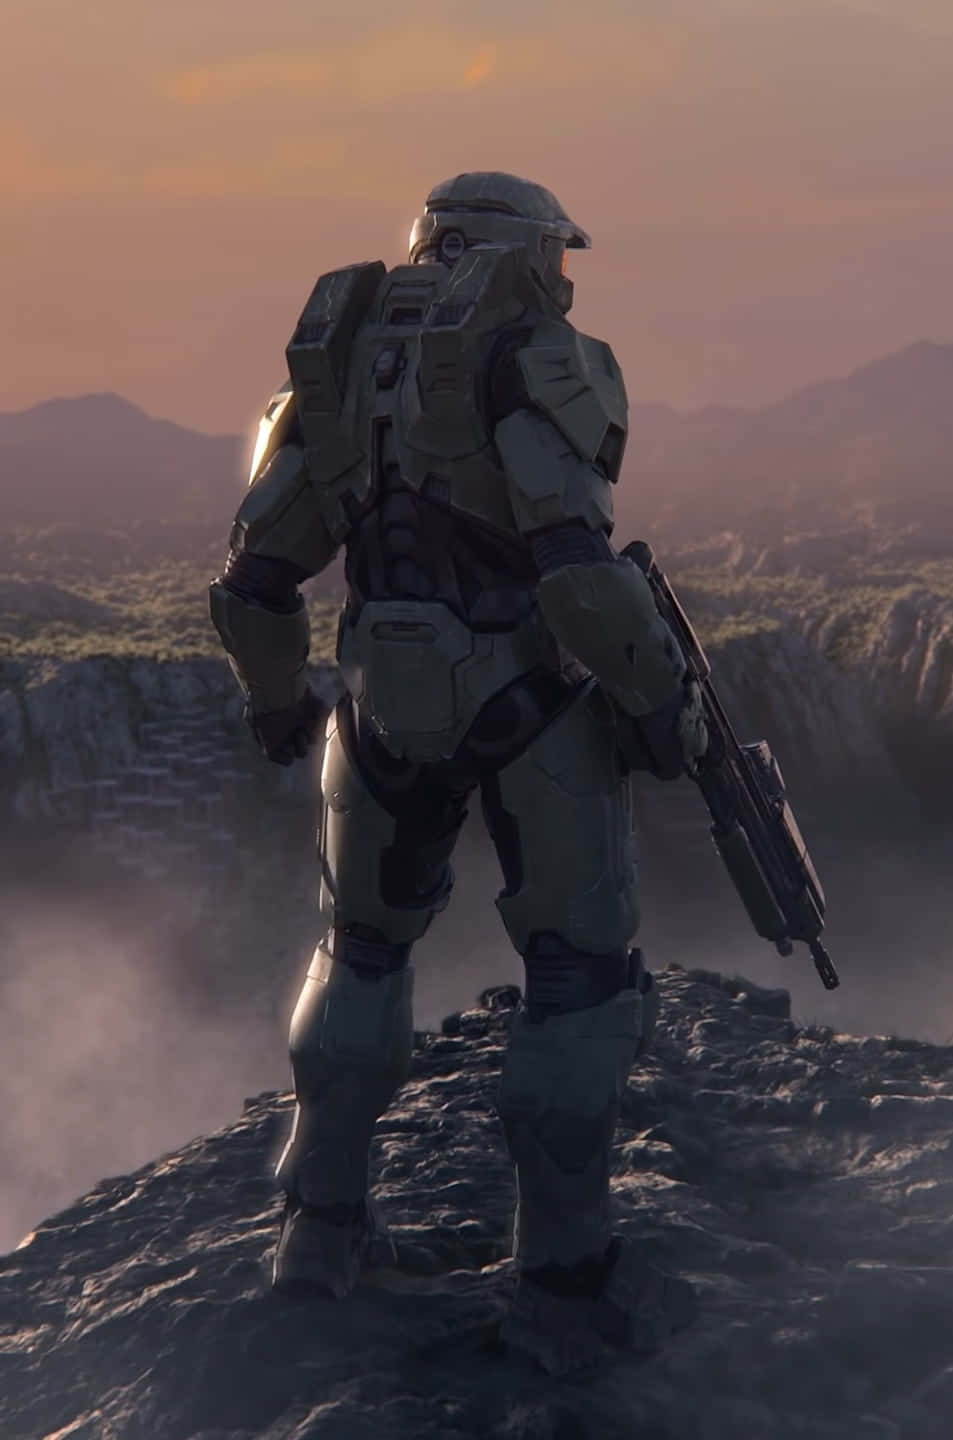 Face your destiny in the Halo universe